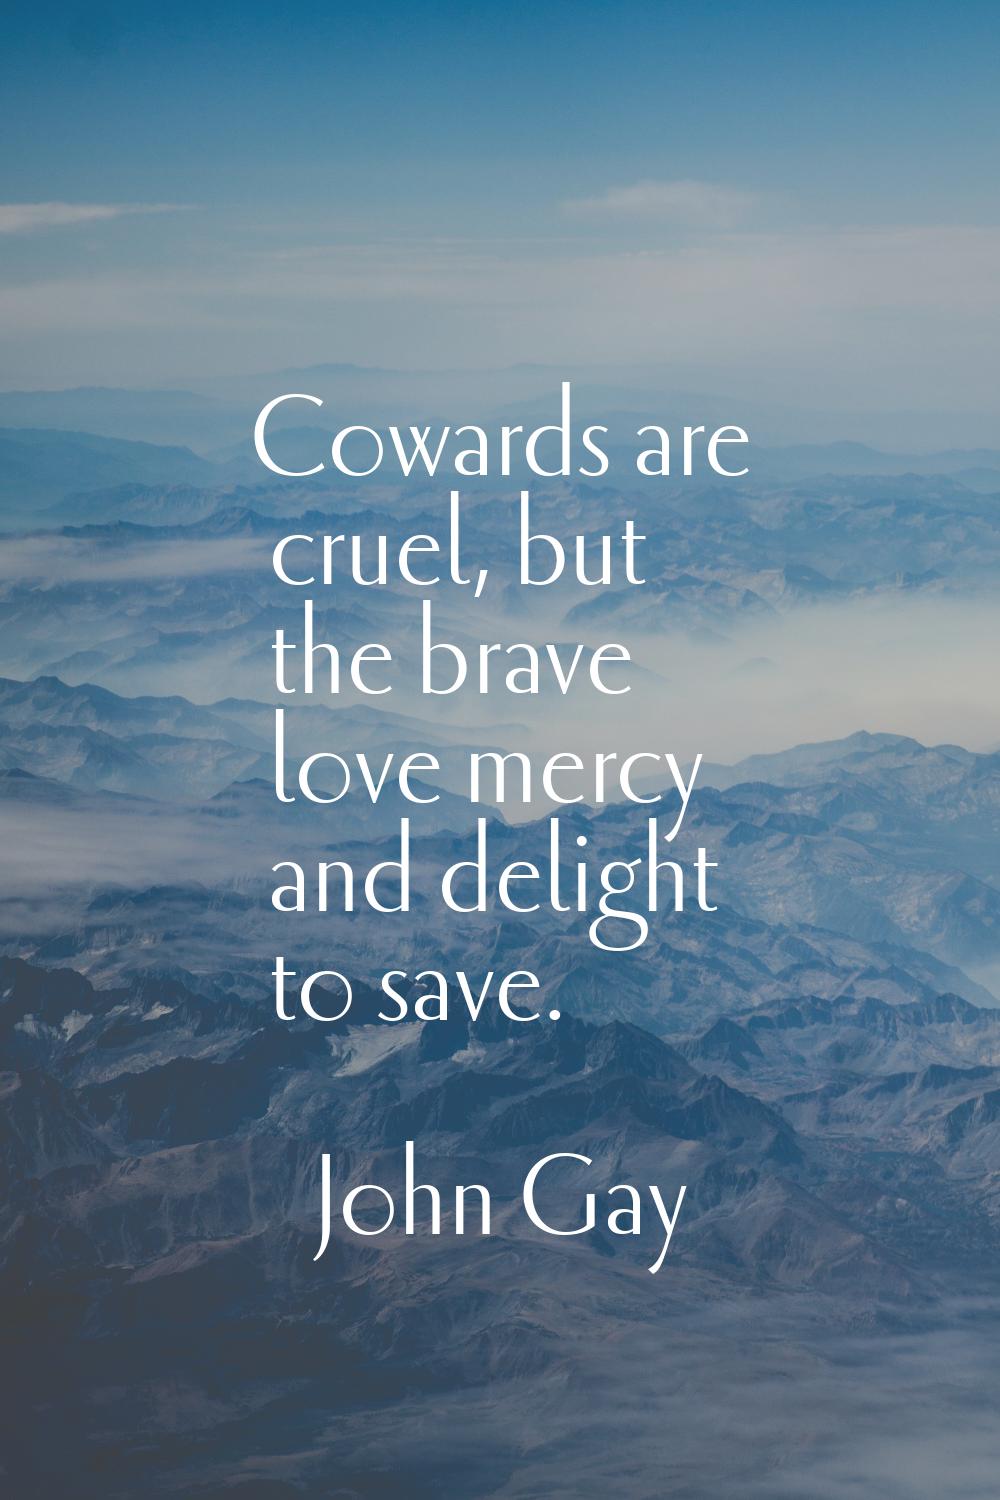 Cowards are cruel, but the brave love mercy and delight to save.